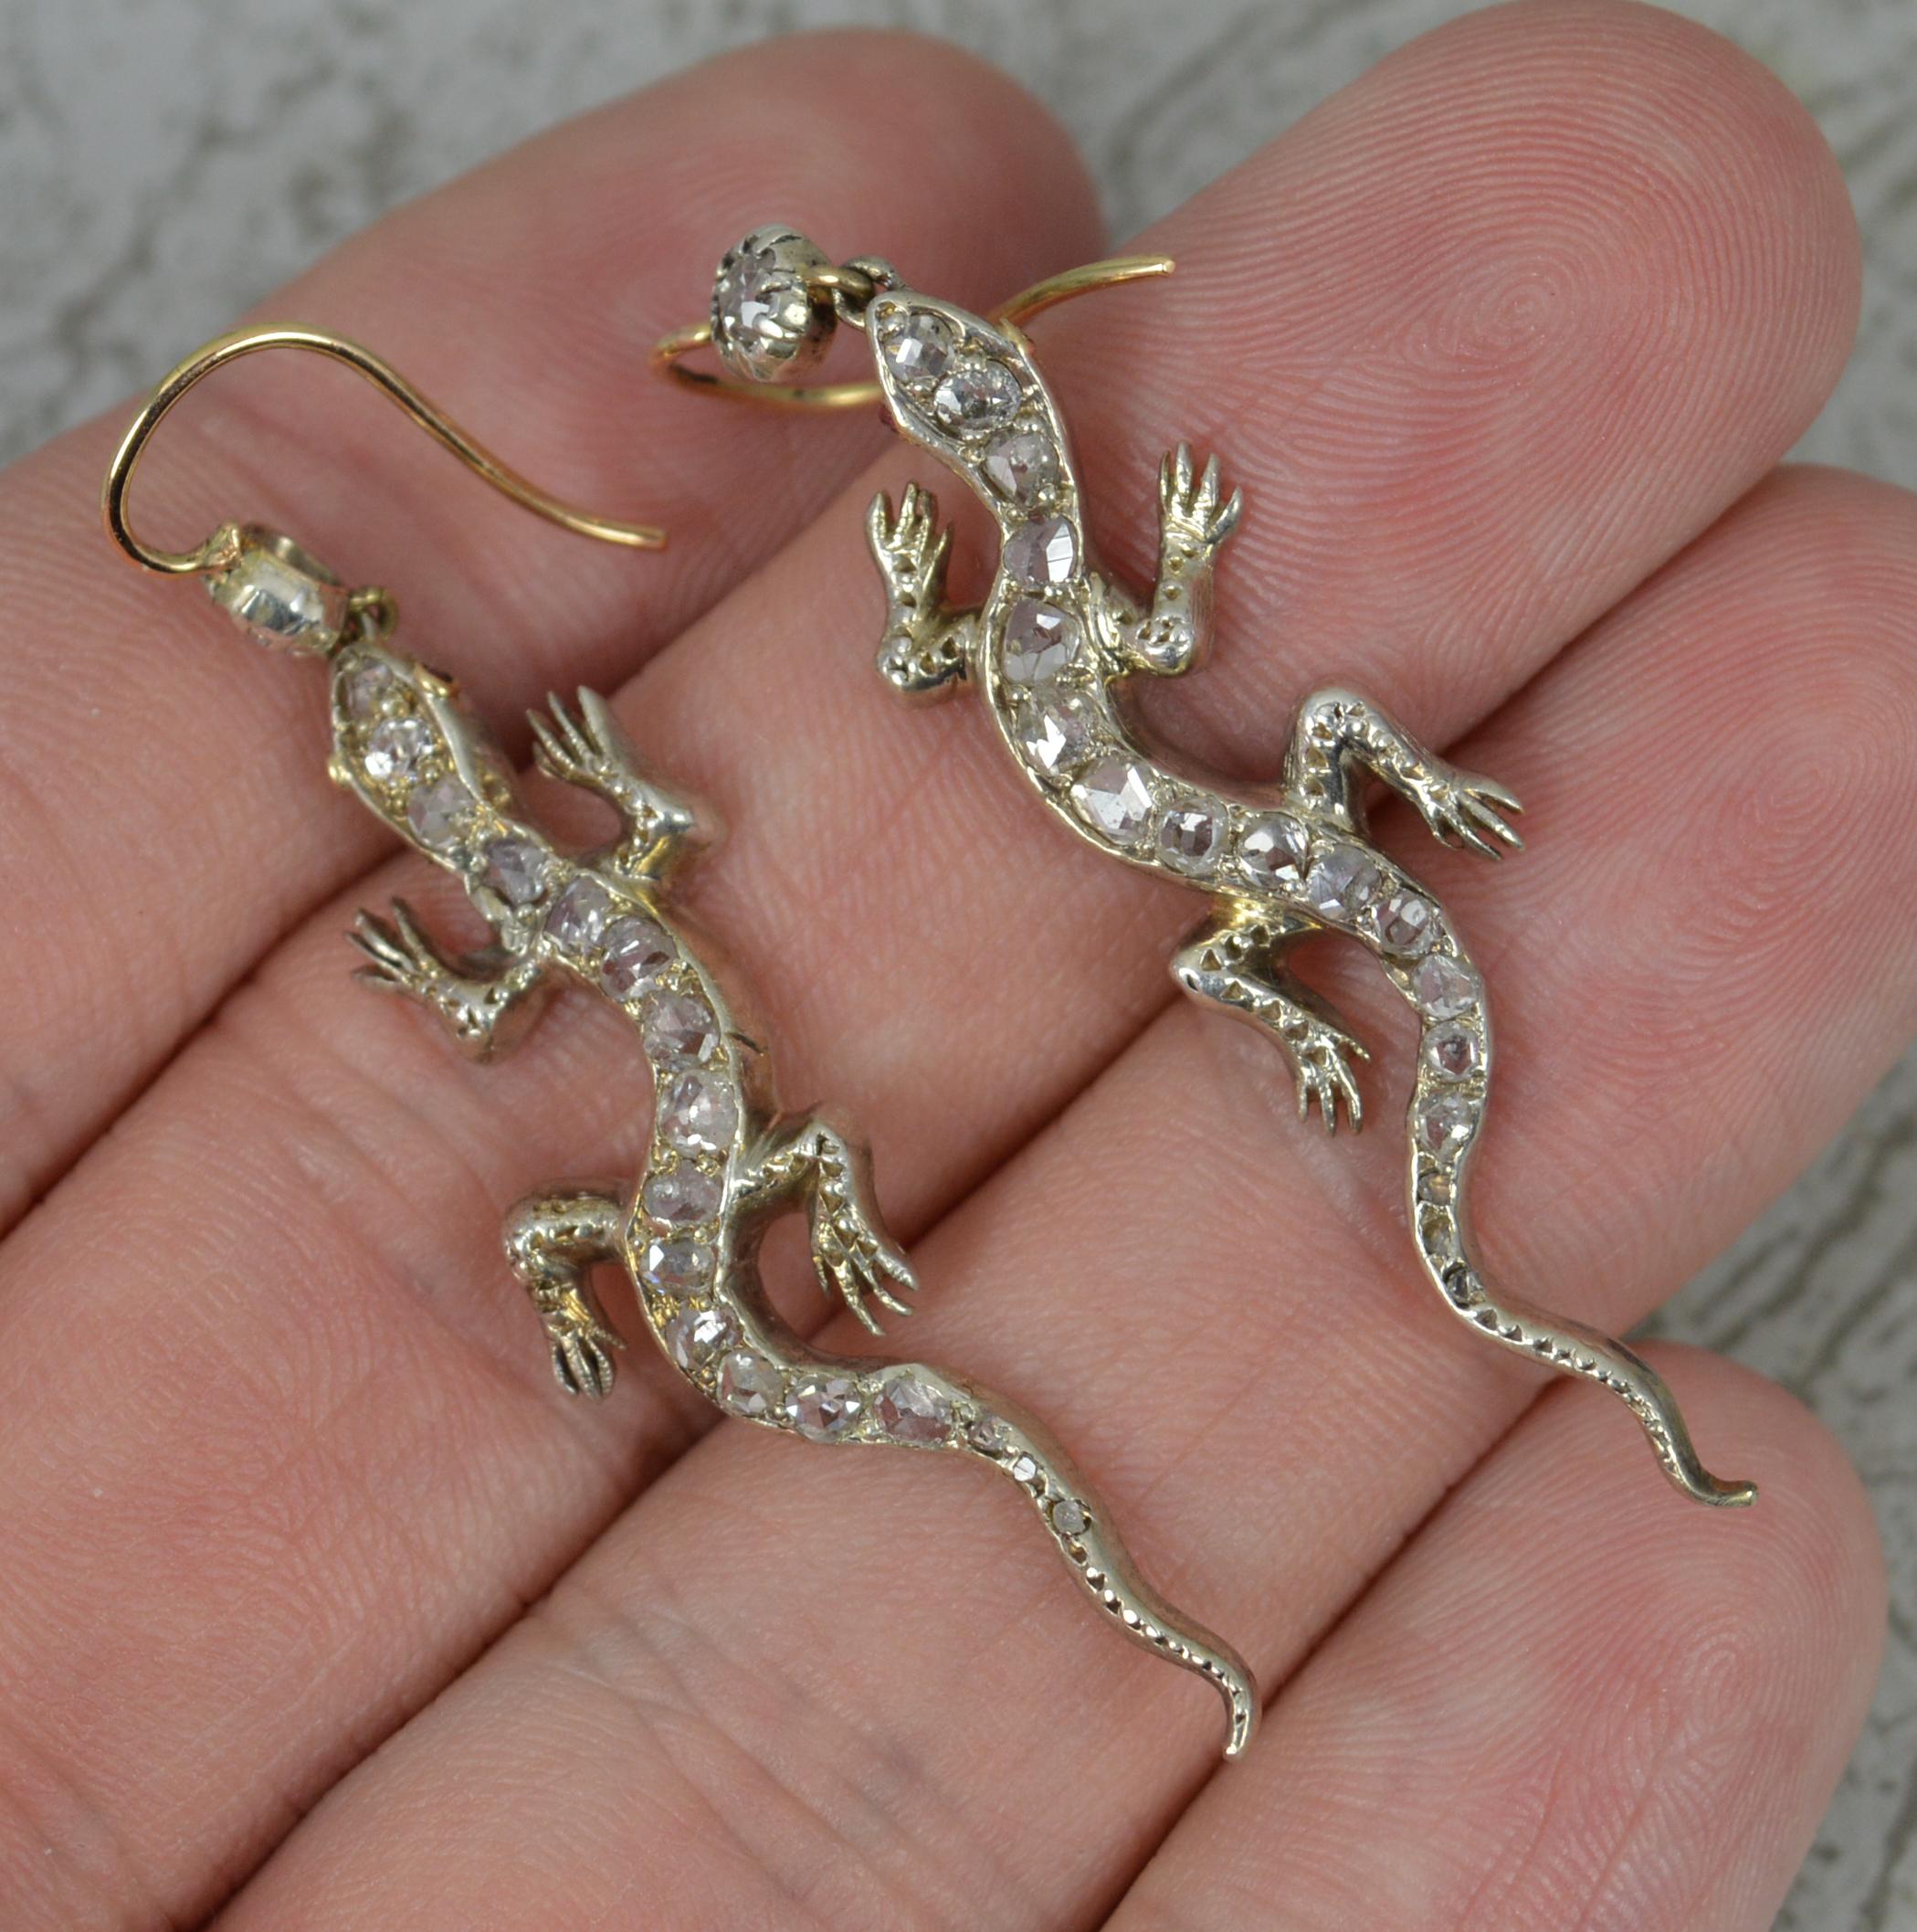 A stunning true Victorian period pair of earrings.
Circa 1860-80.
Solid 15 carat rose gold example with silver settings, typical of the period.
Finely made in the form of a gecko or newt. Encrusted with many natural rose and old cut diamonds